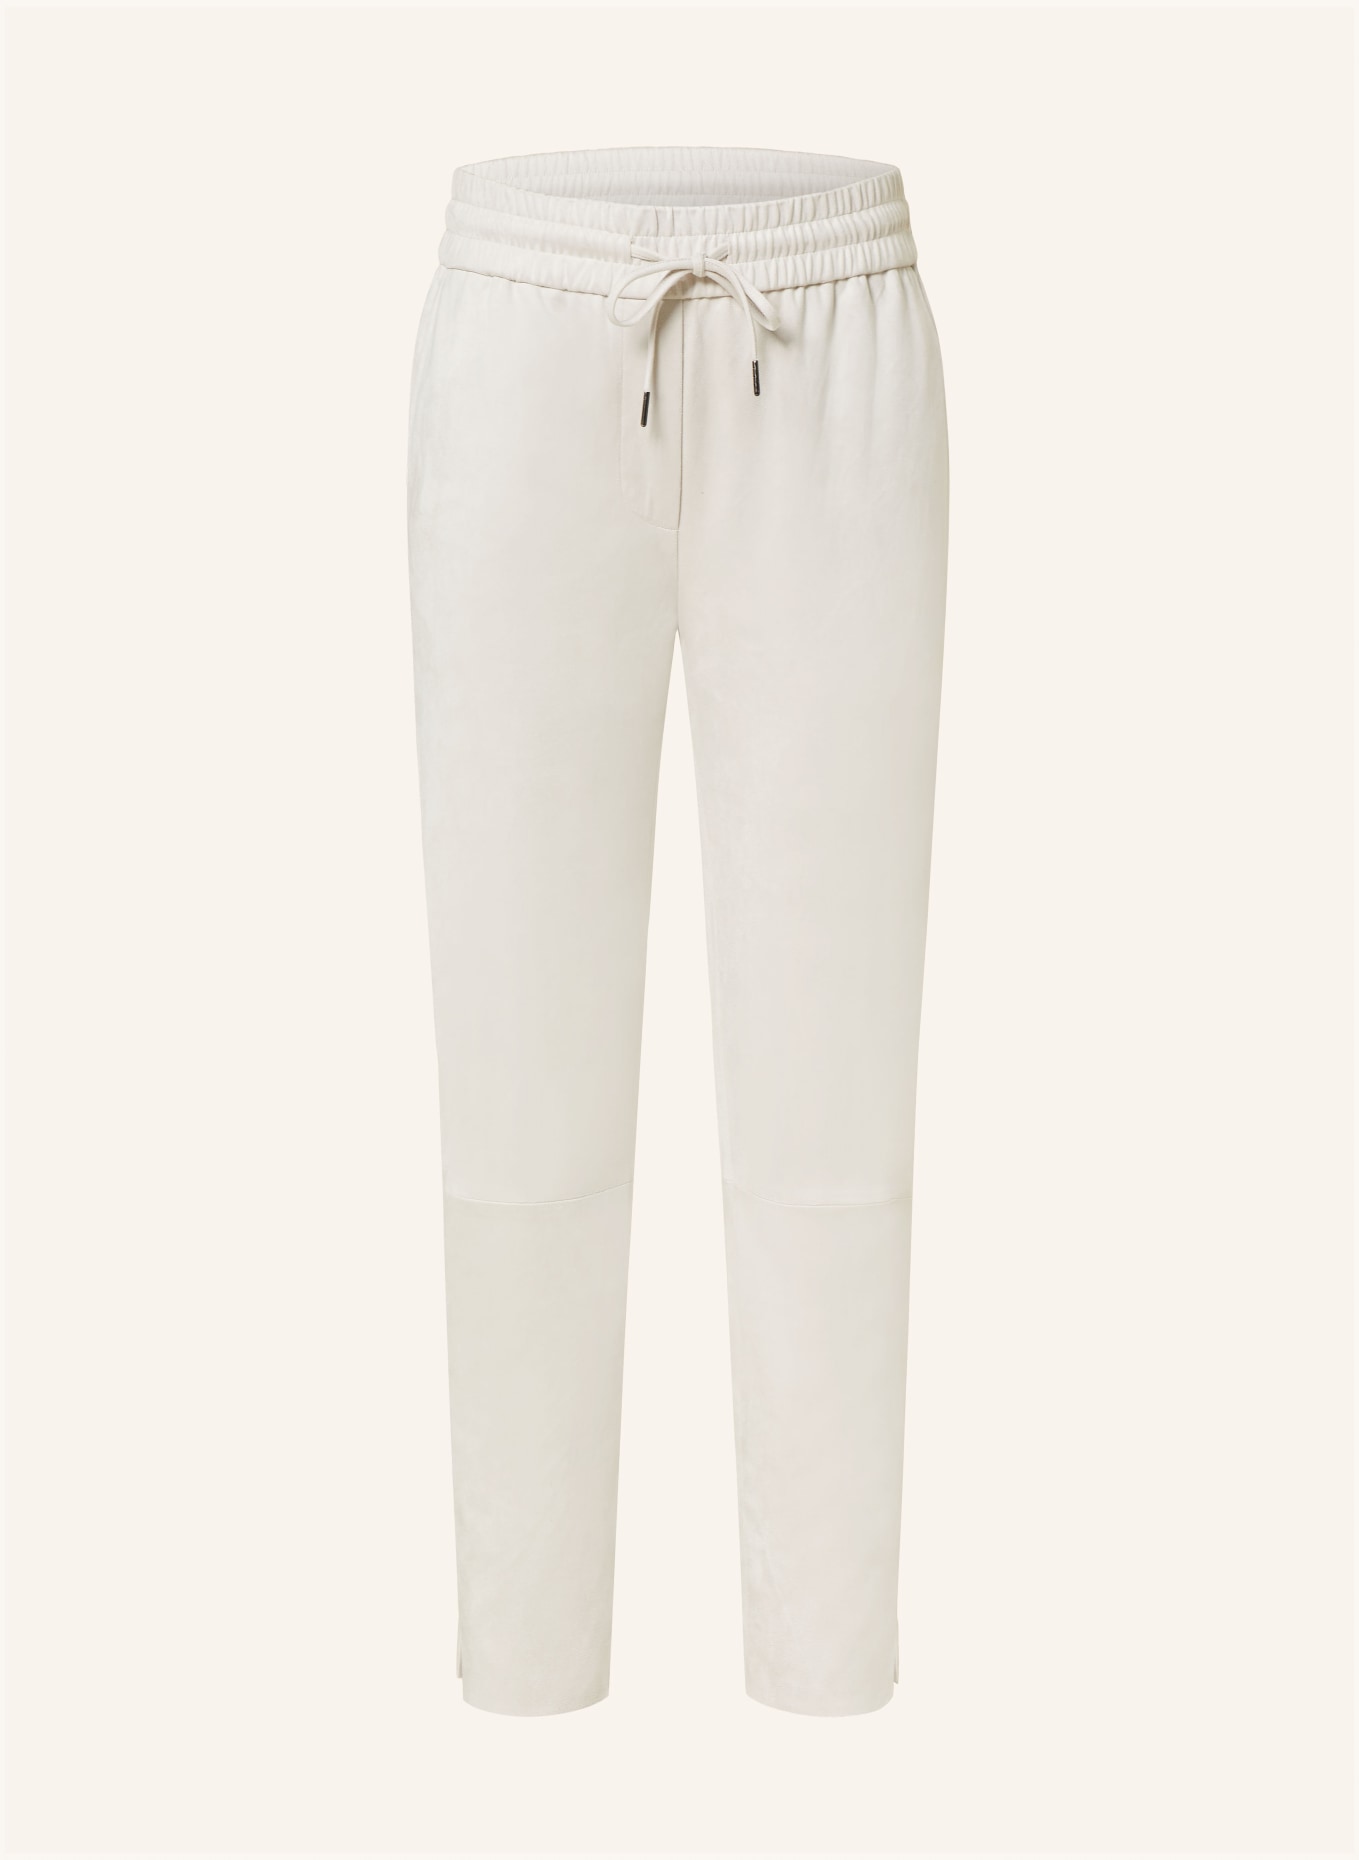 Juvia 7/8 trousers in leather look, Color: CREAM (Image 1)